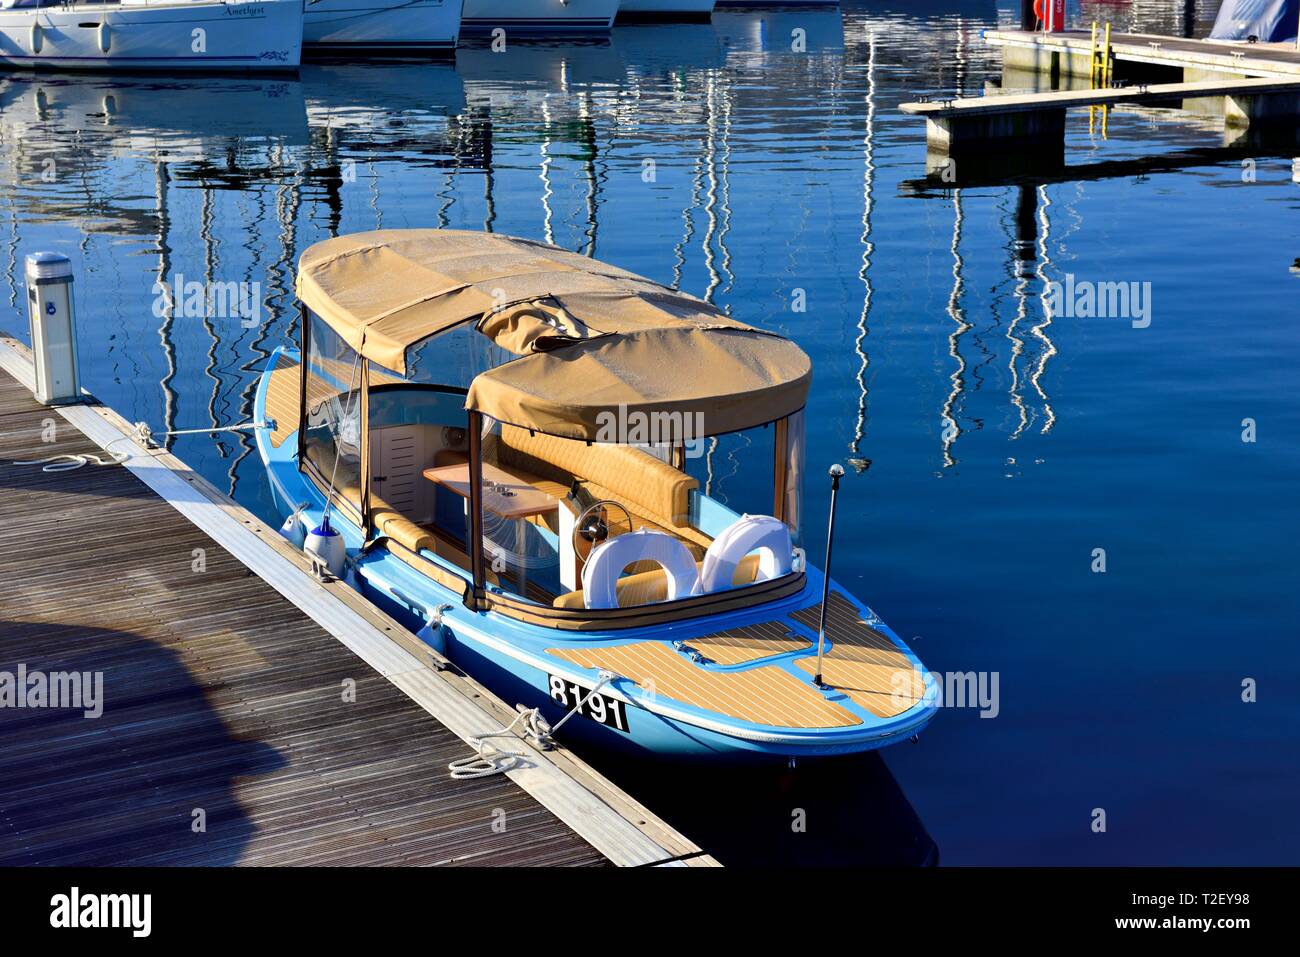 Canadian Electric Boat Company, Electric Boats Canada,Electric boat for hire,Bowness on Windermere,Lake District,Cumbria,England,UK Stock Photo